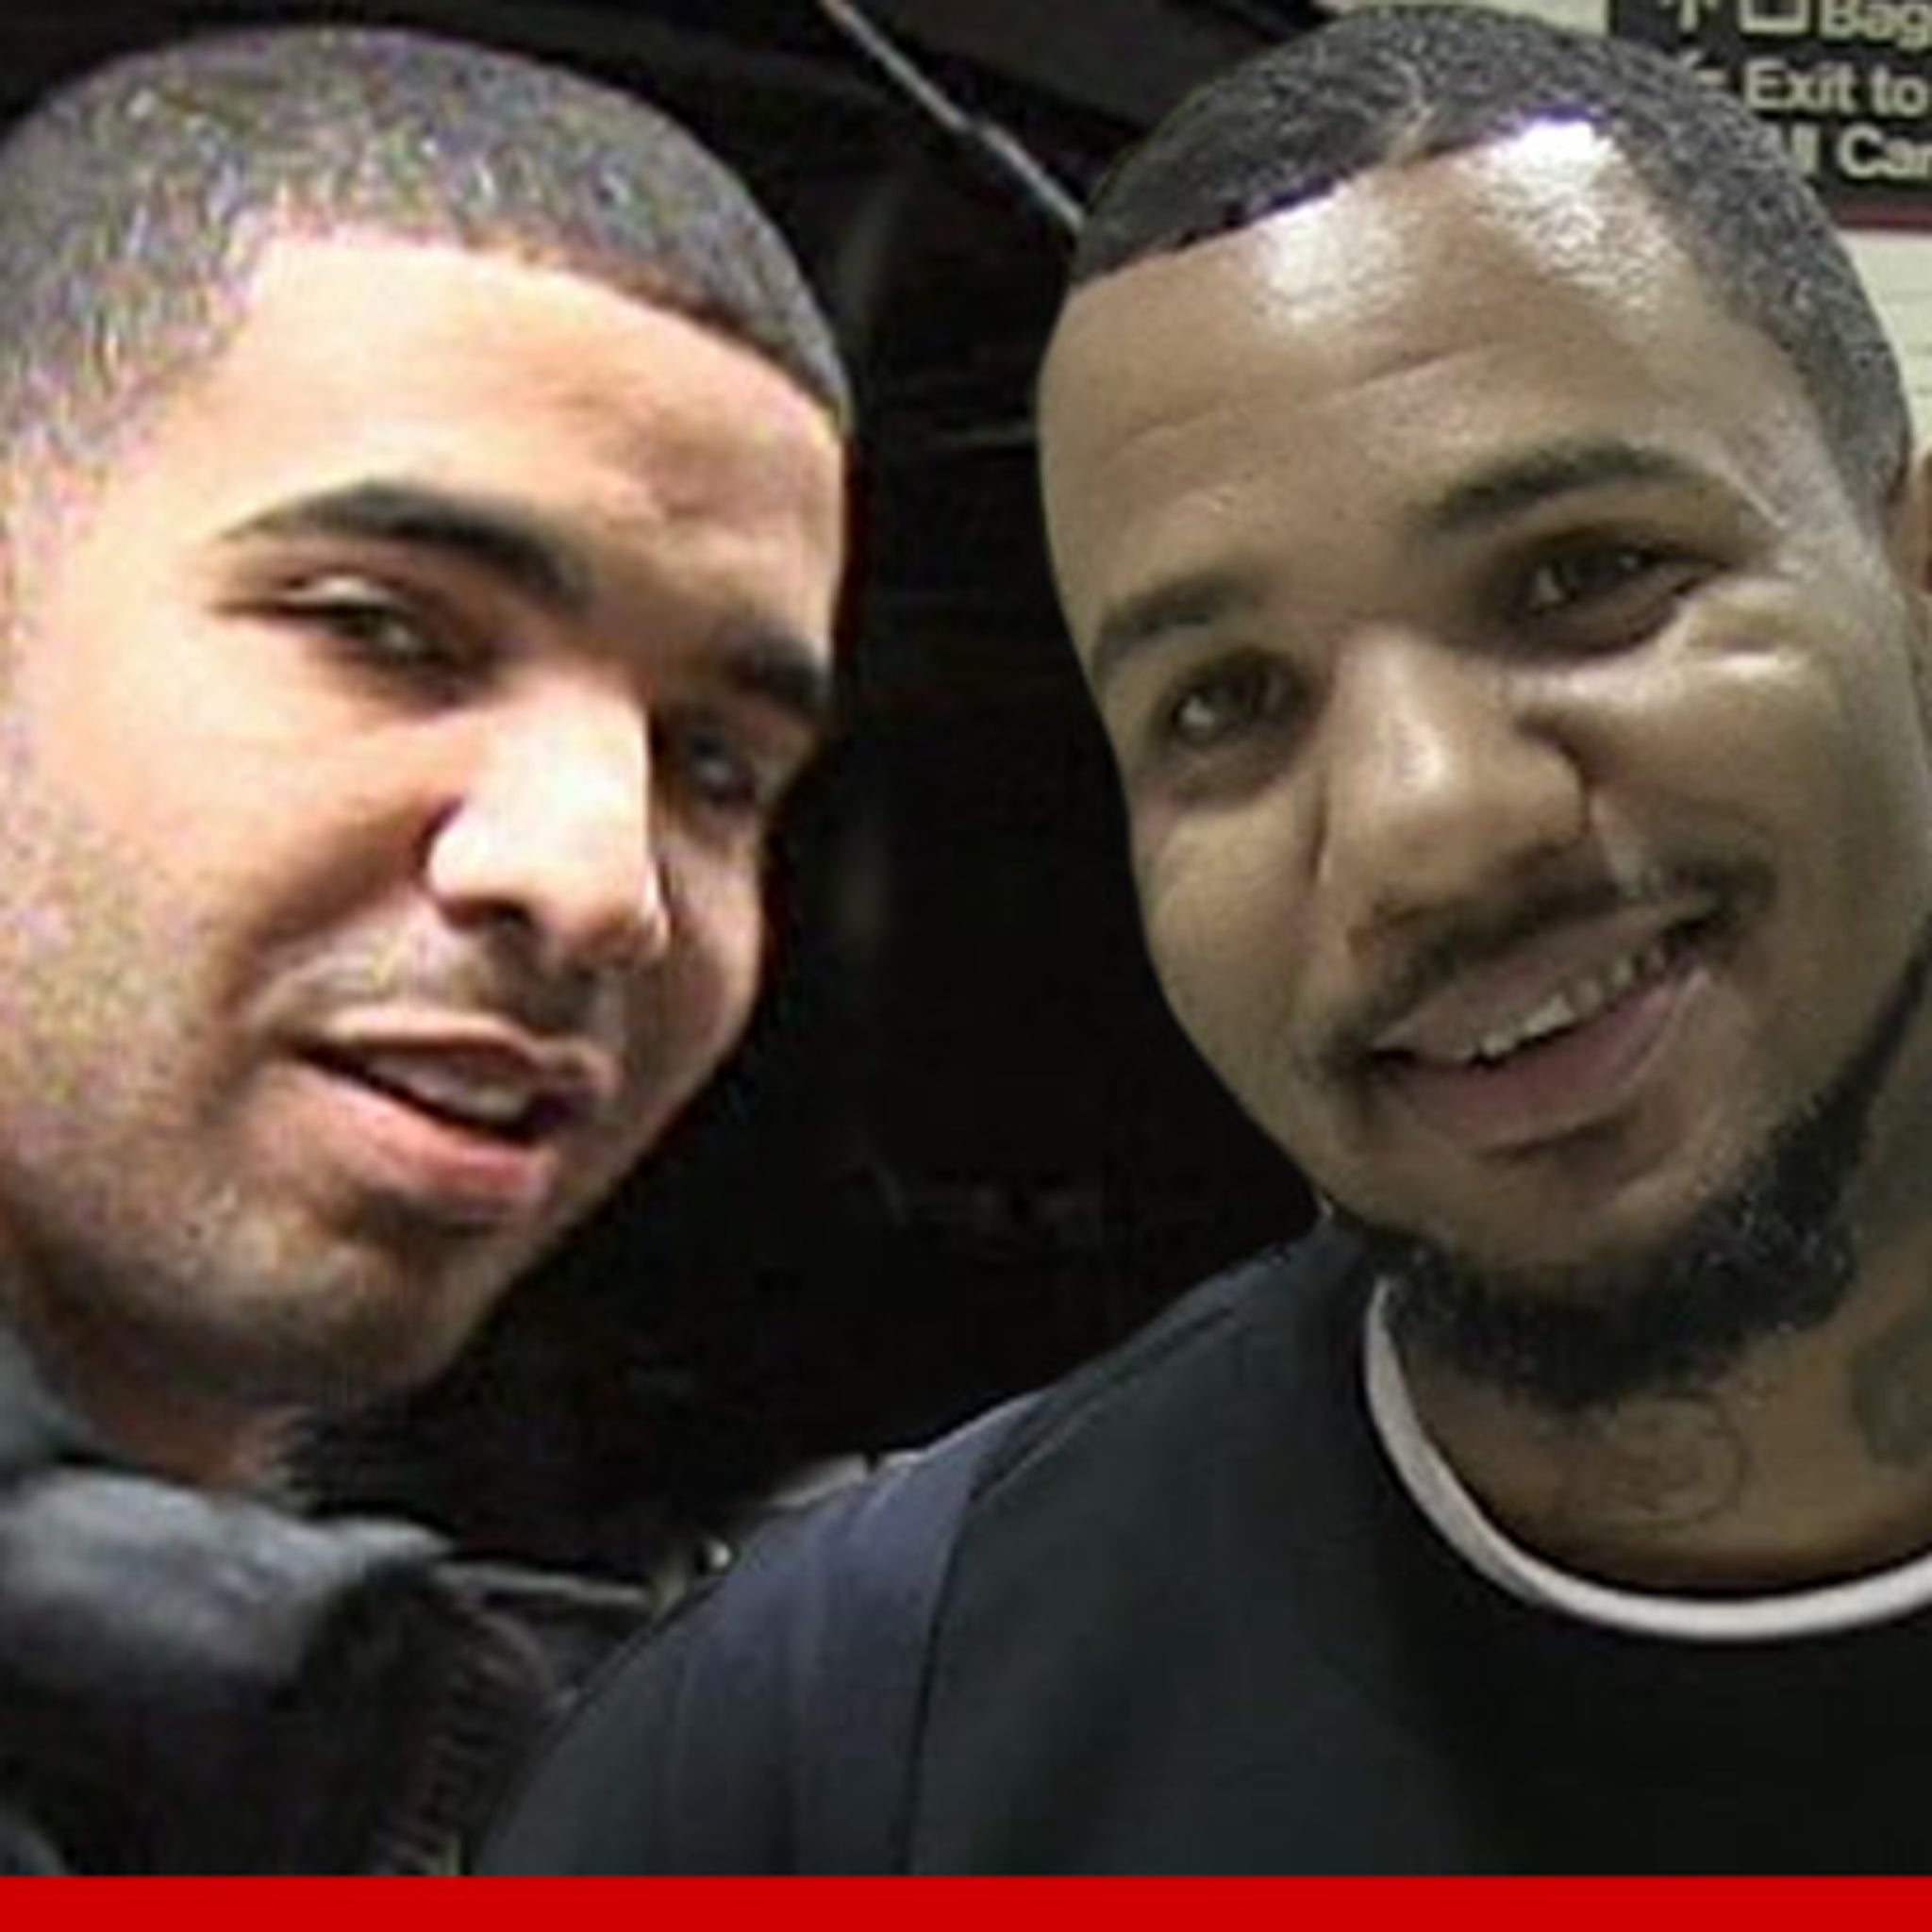 Drake & The Game -- We'll Help Pay for Funerals  After 5 Kids Die In  Tragic Ohio Housefire